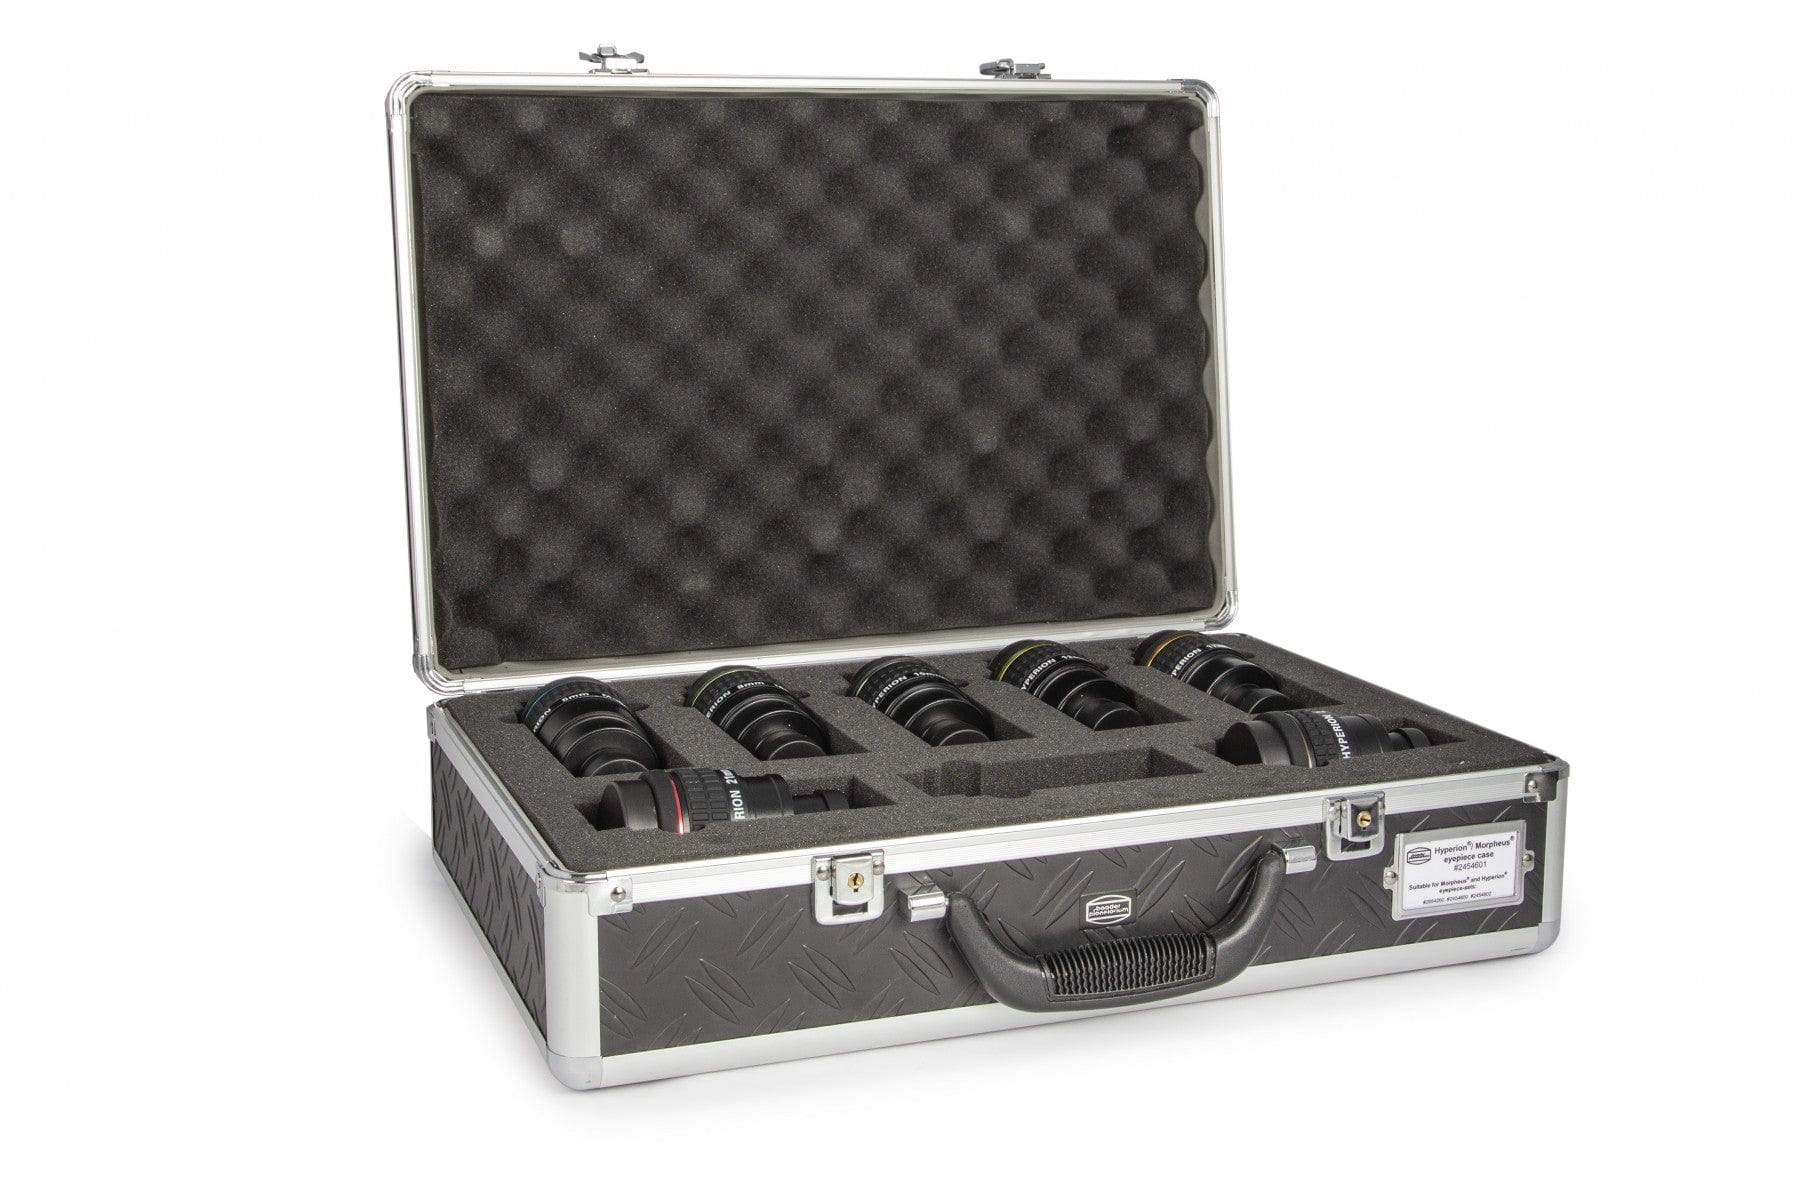 Baader Planetarium Eyepiece Baader Complete Eyepiece Set Consisting of All 7 Hyperion Modular Eyepieces - Includes Fitted Hardcase - 2454600